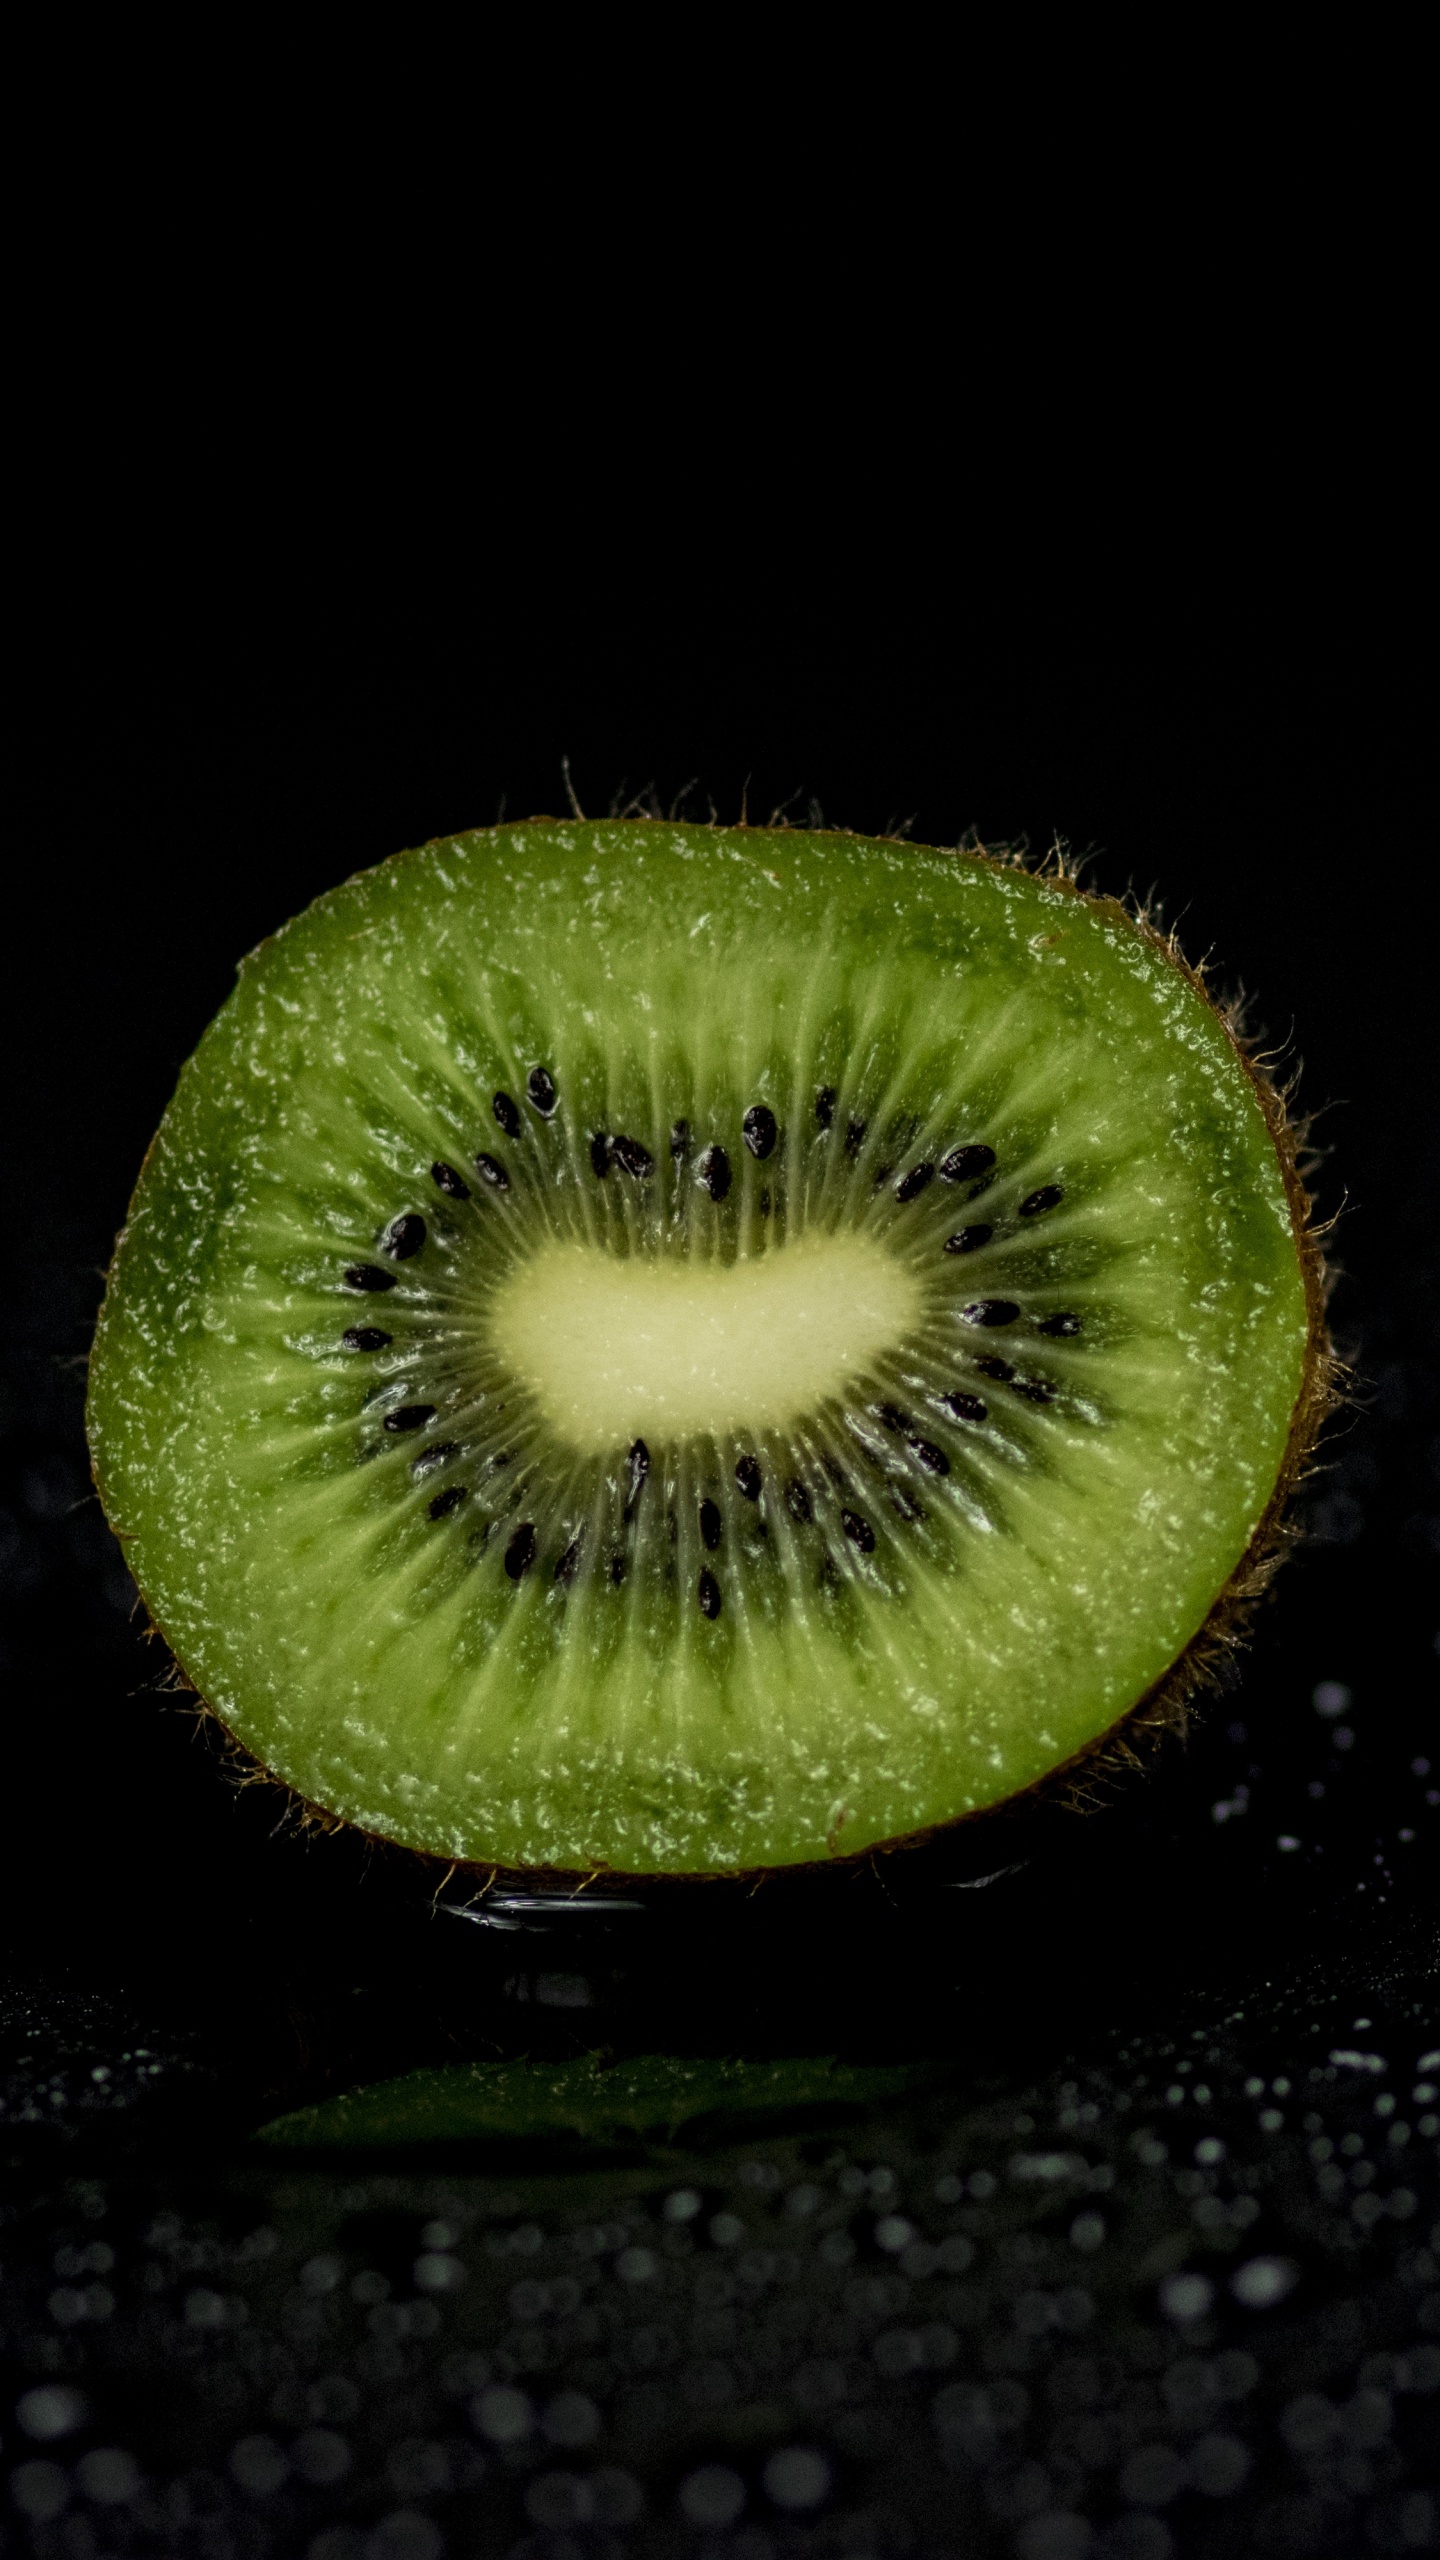 Green Round Fruit on Black Surface. Wallpaper in 1440x2560 Resolution